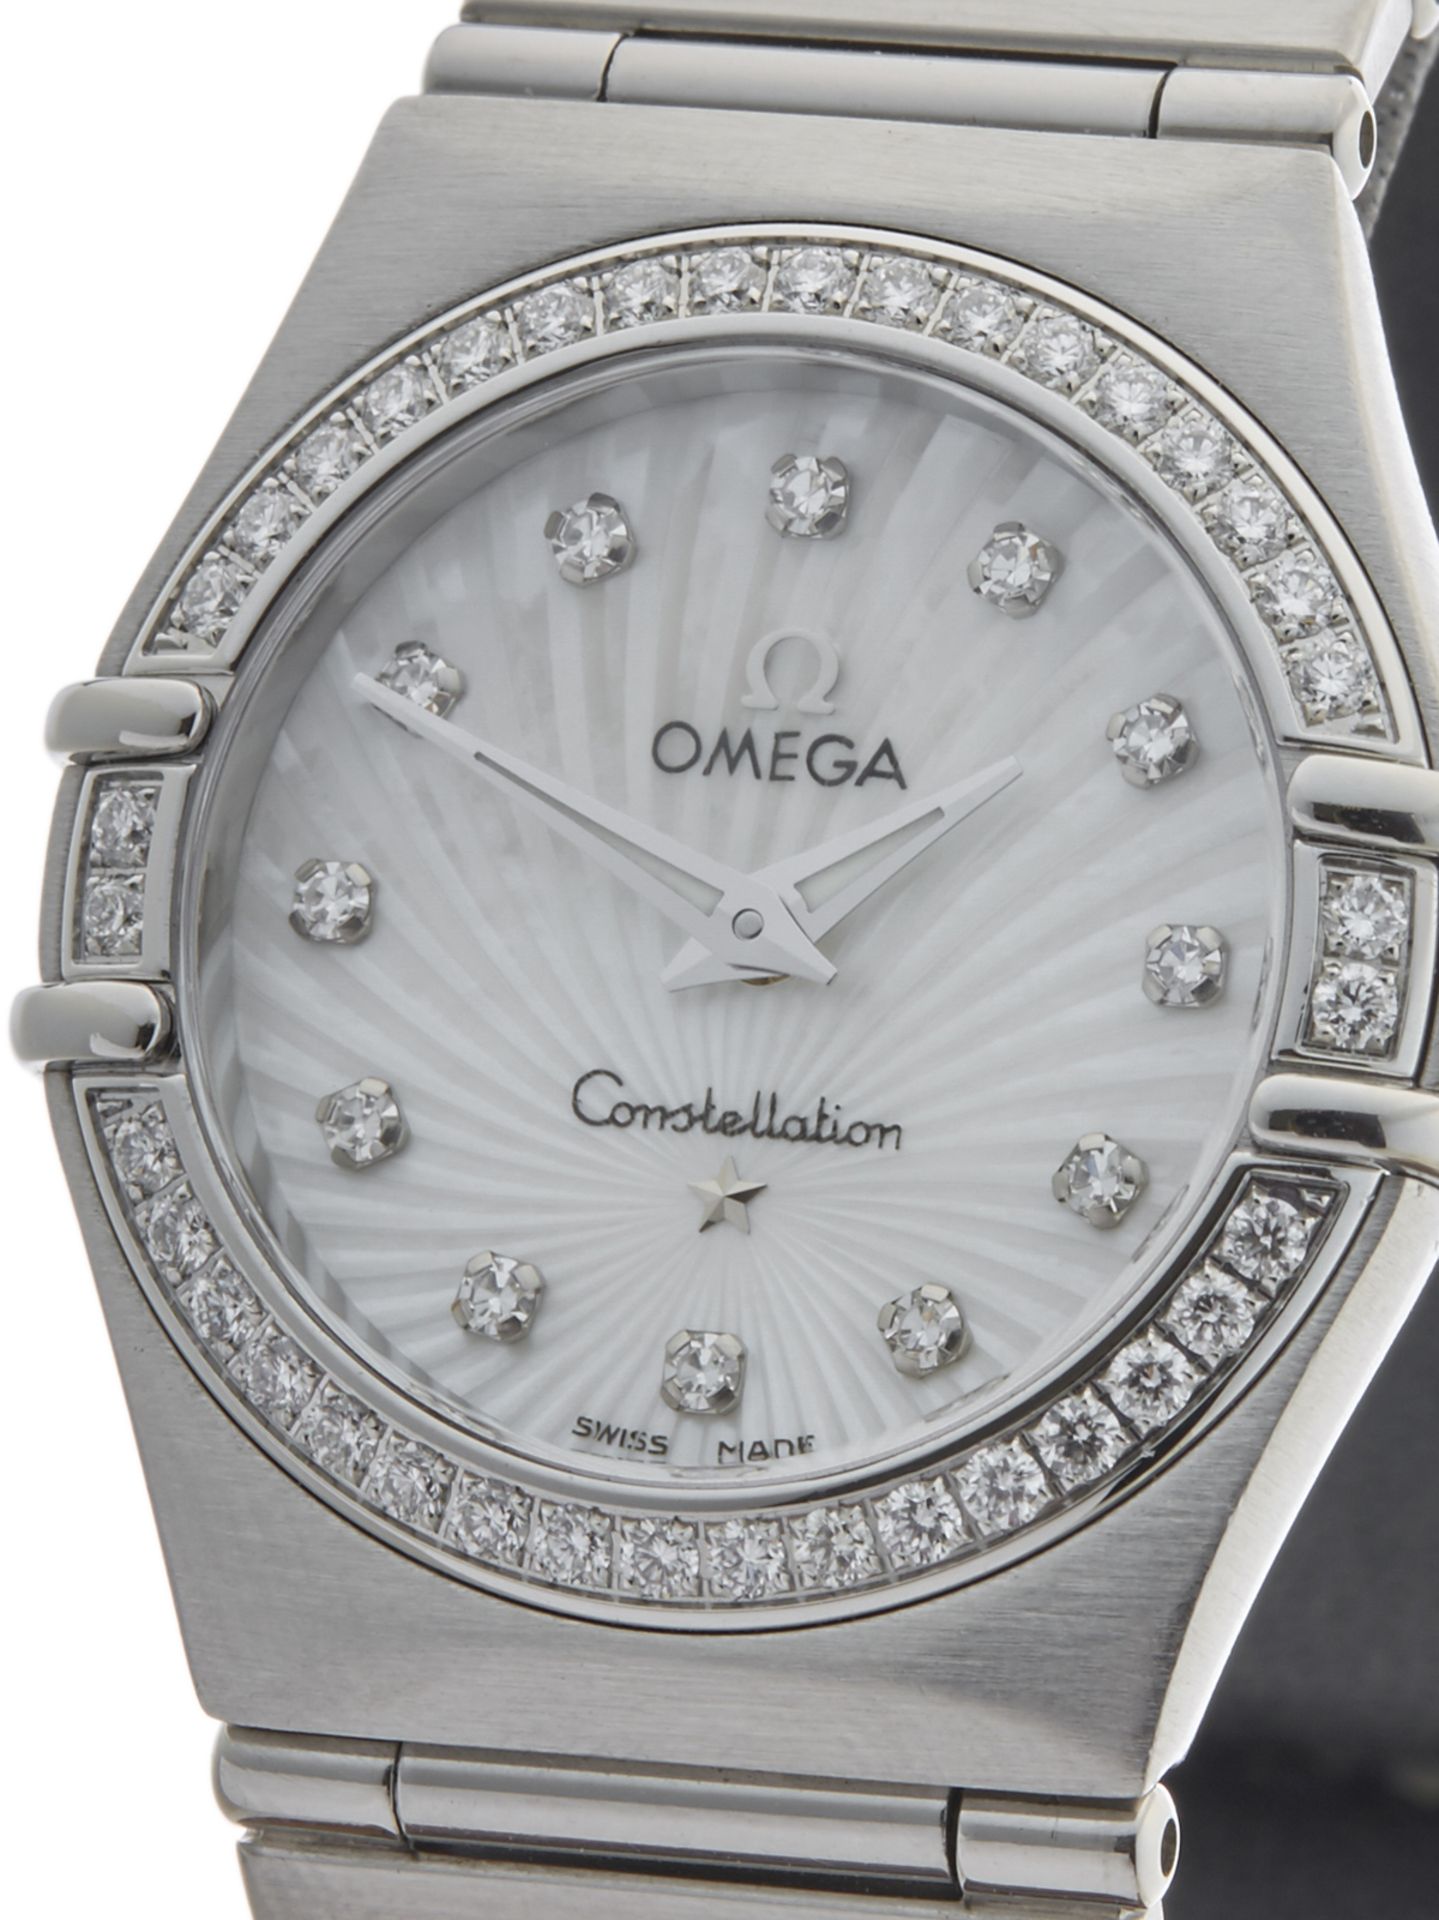 Omega Constellation 25mm Stainless Steel - Image 3 of 9